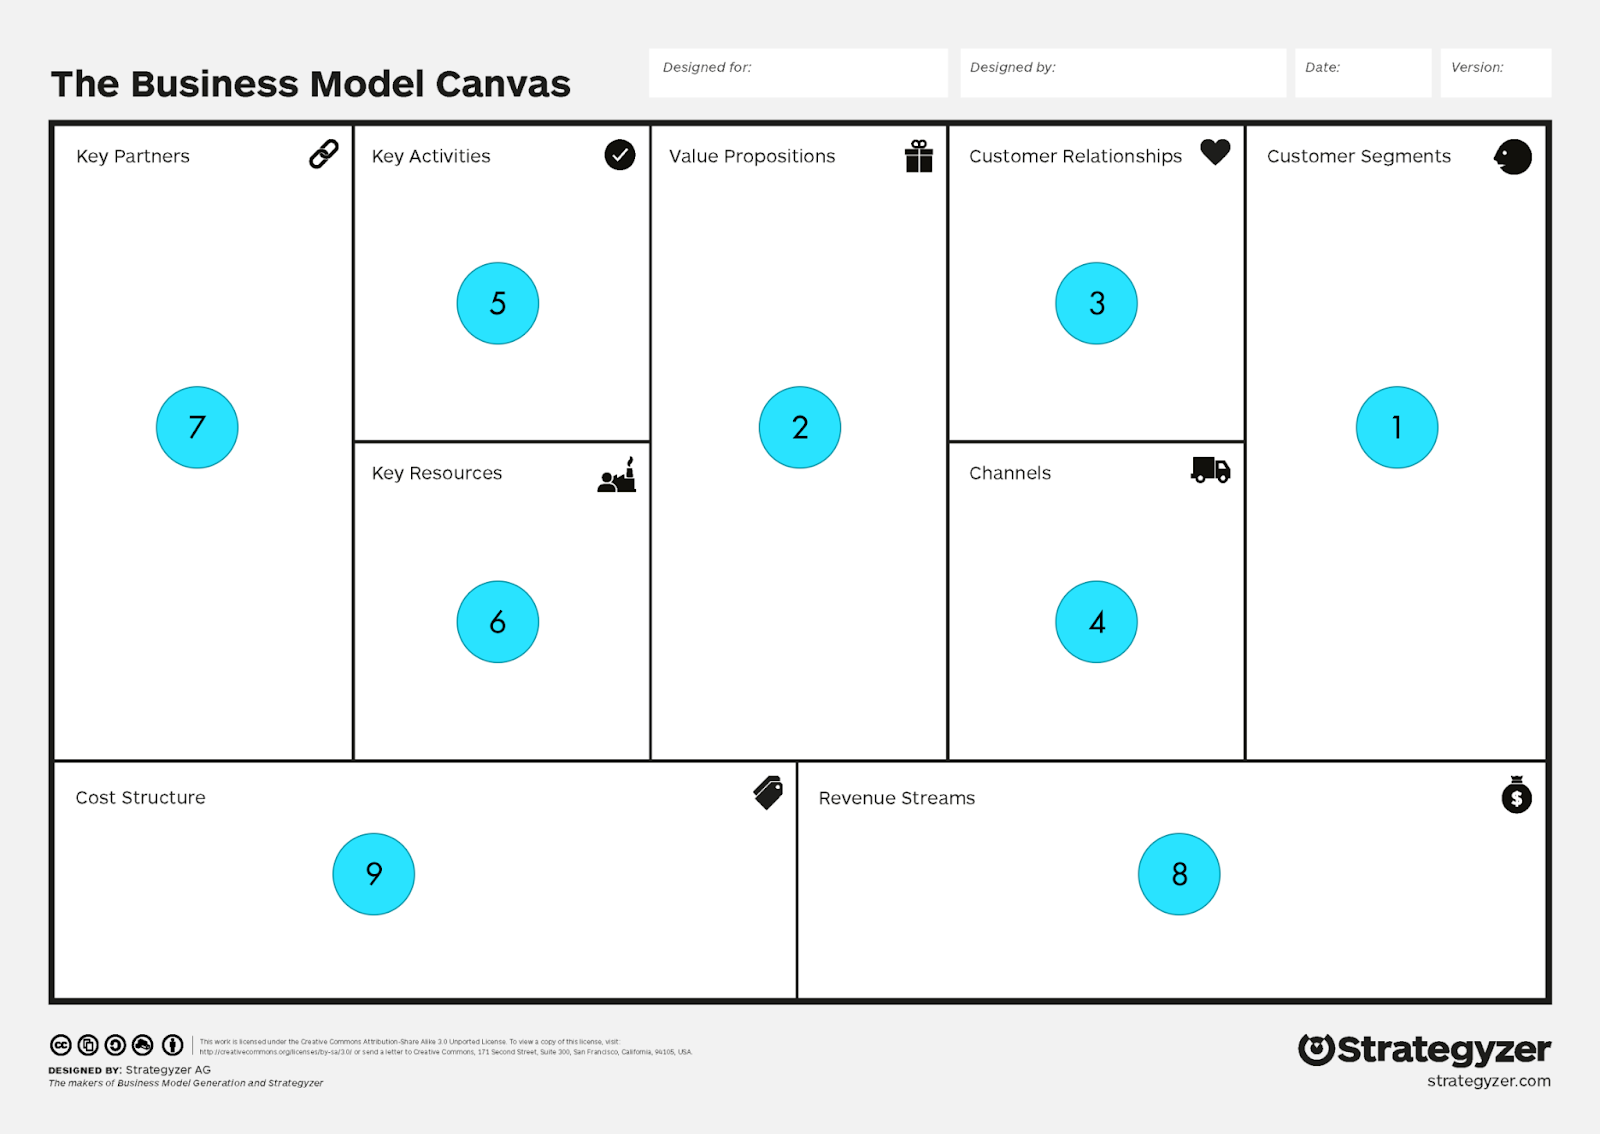 The business model canvas